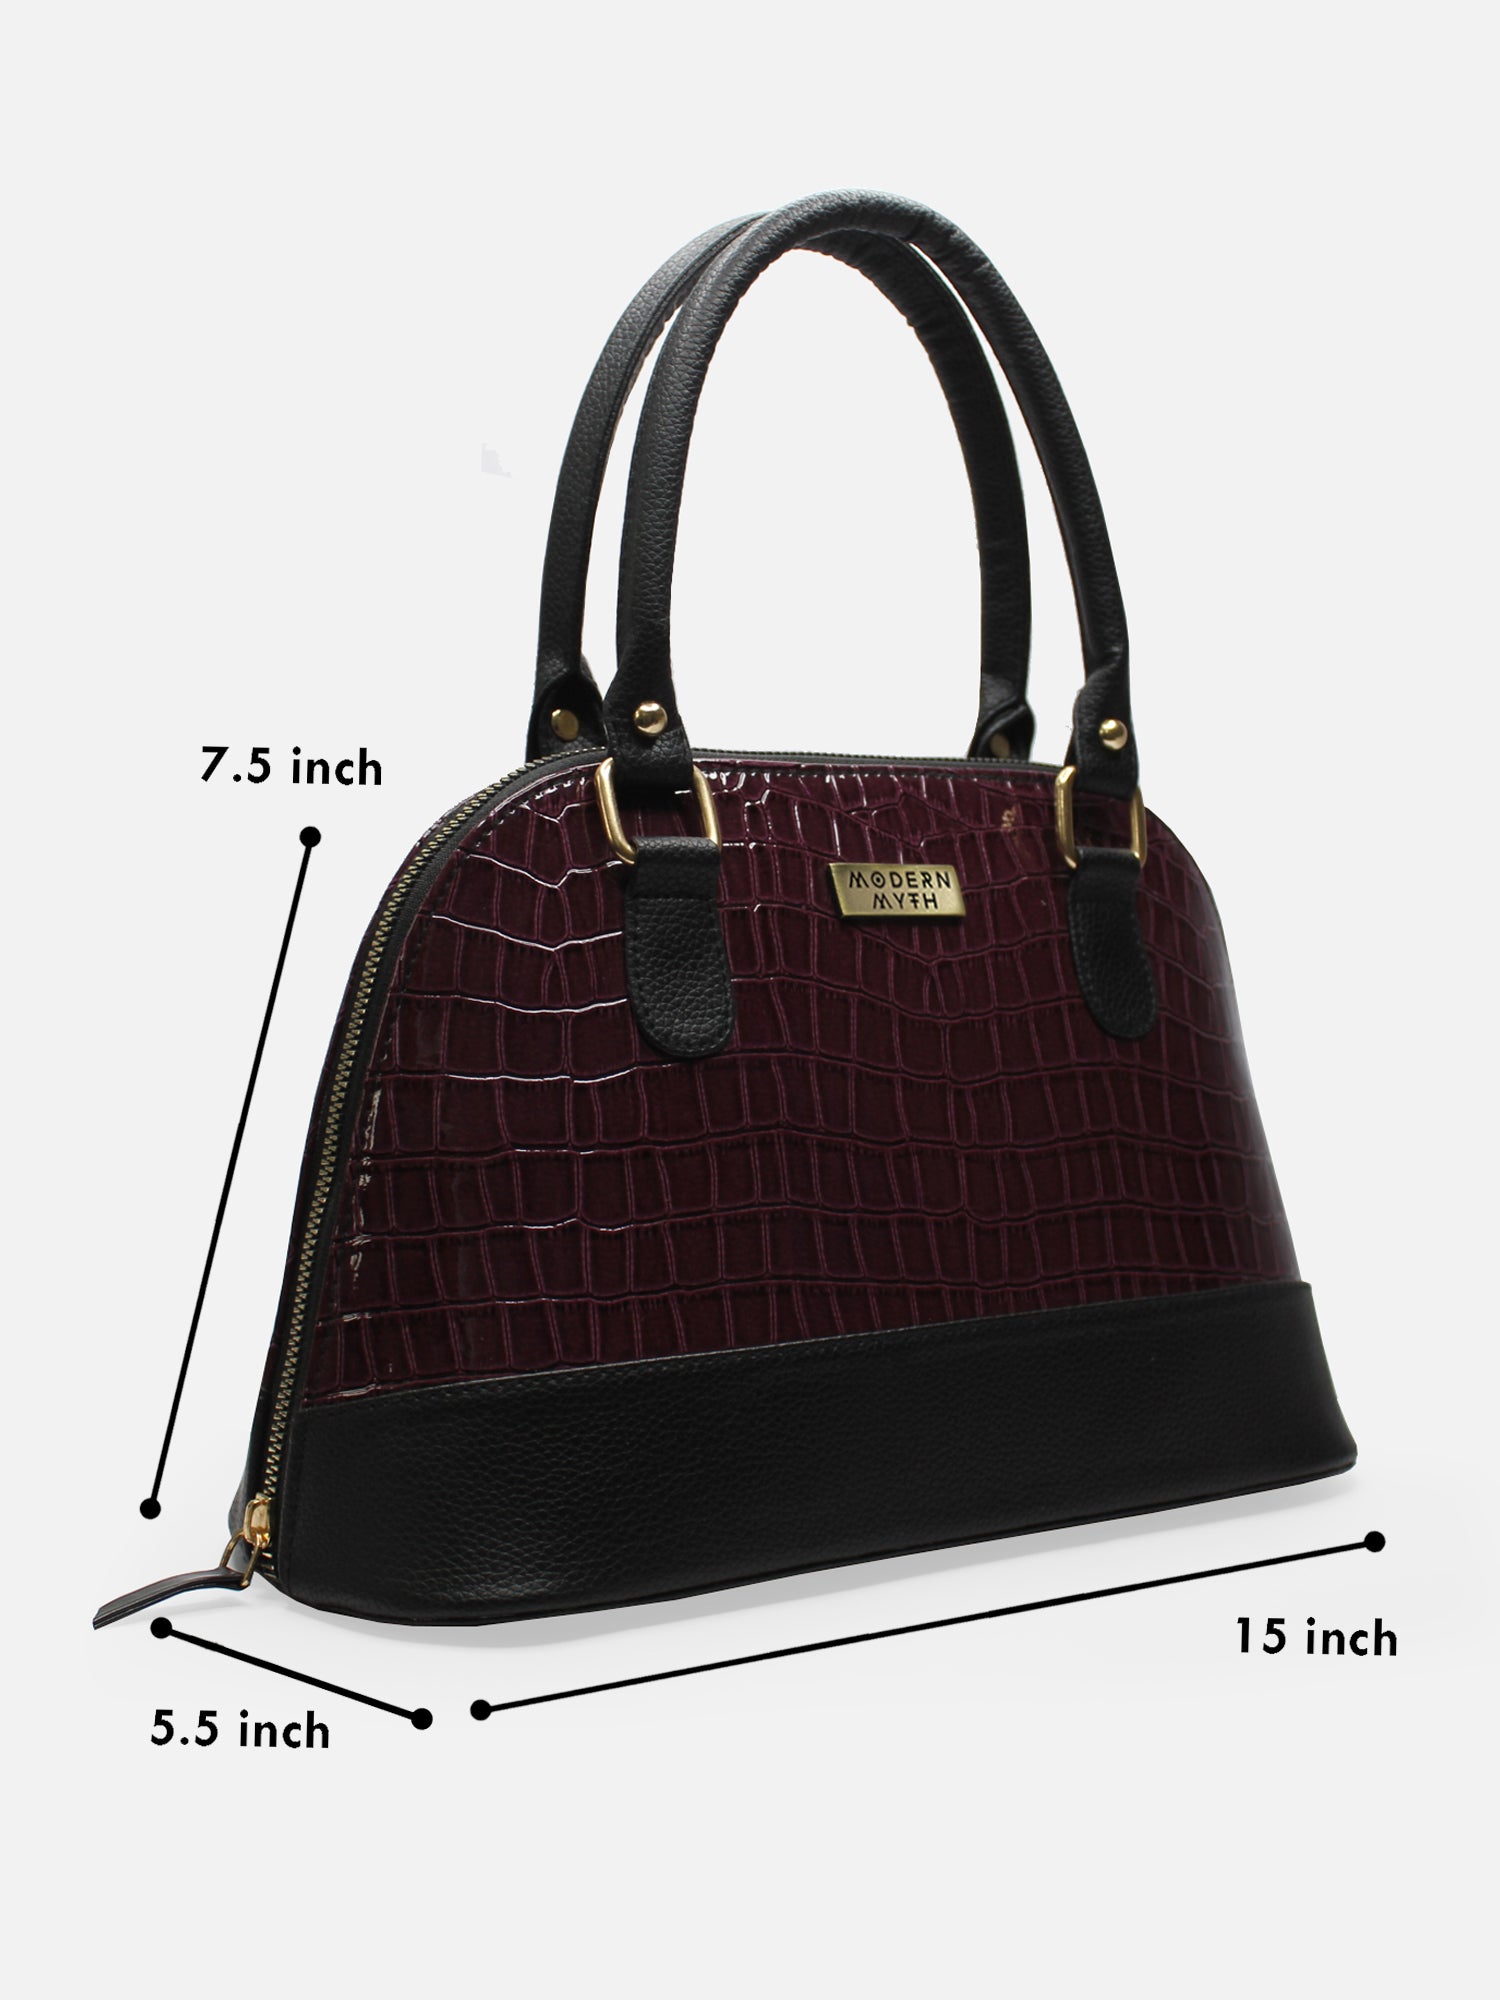 Buy Leather Handbags for Women Online - Shop Now! – Leather Talks